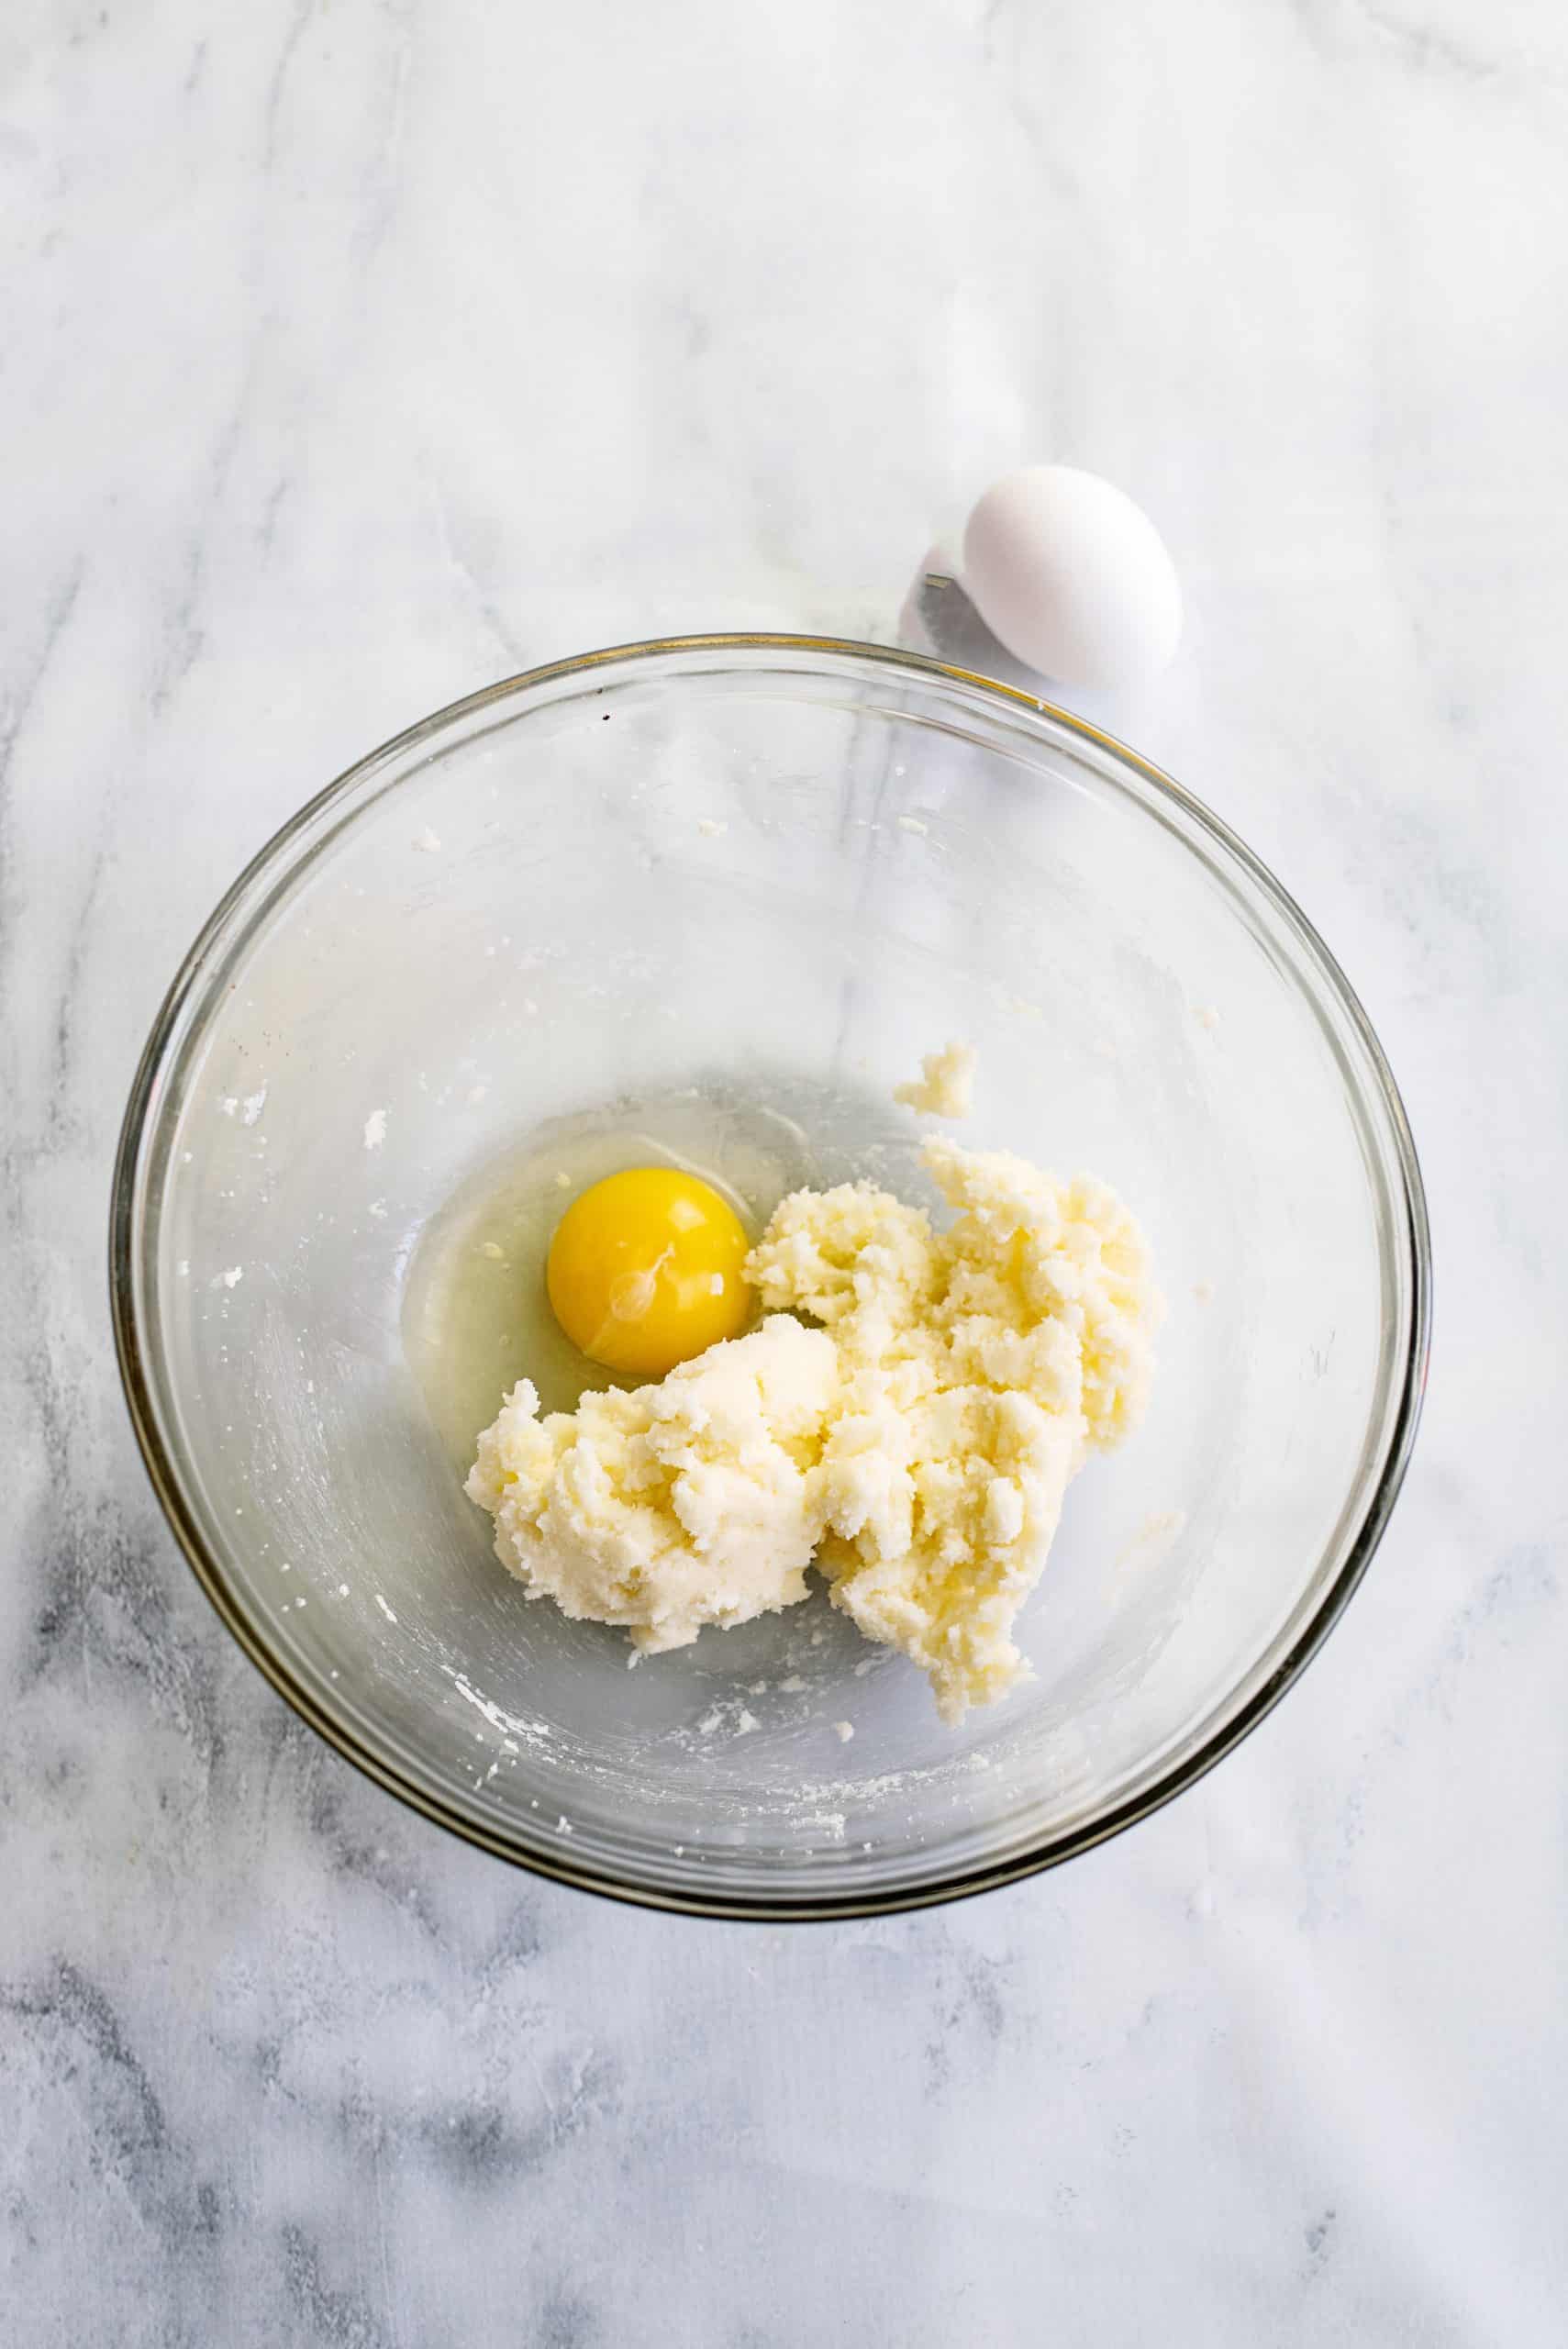 Egg added to blended butter and sugar mixture.